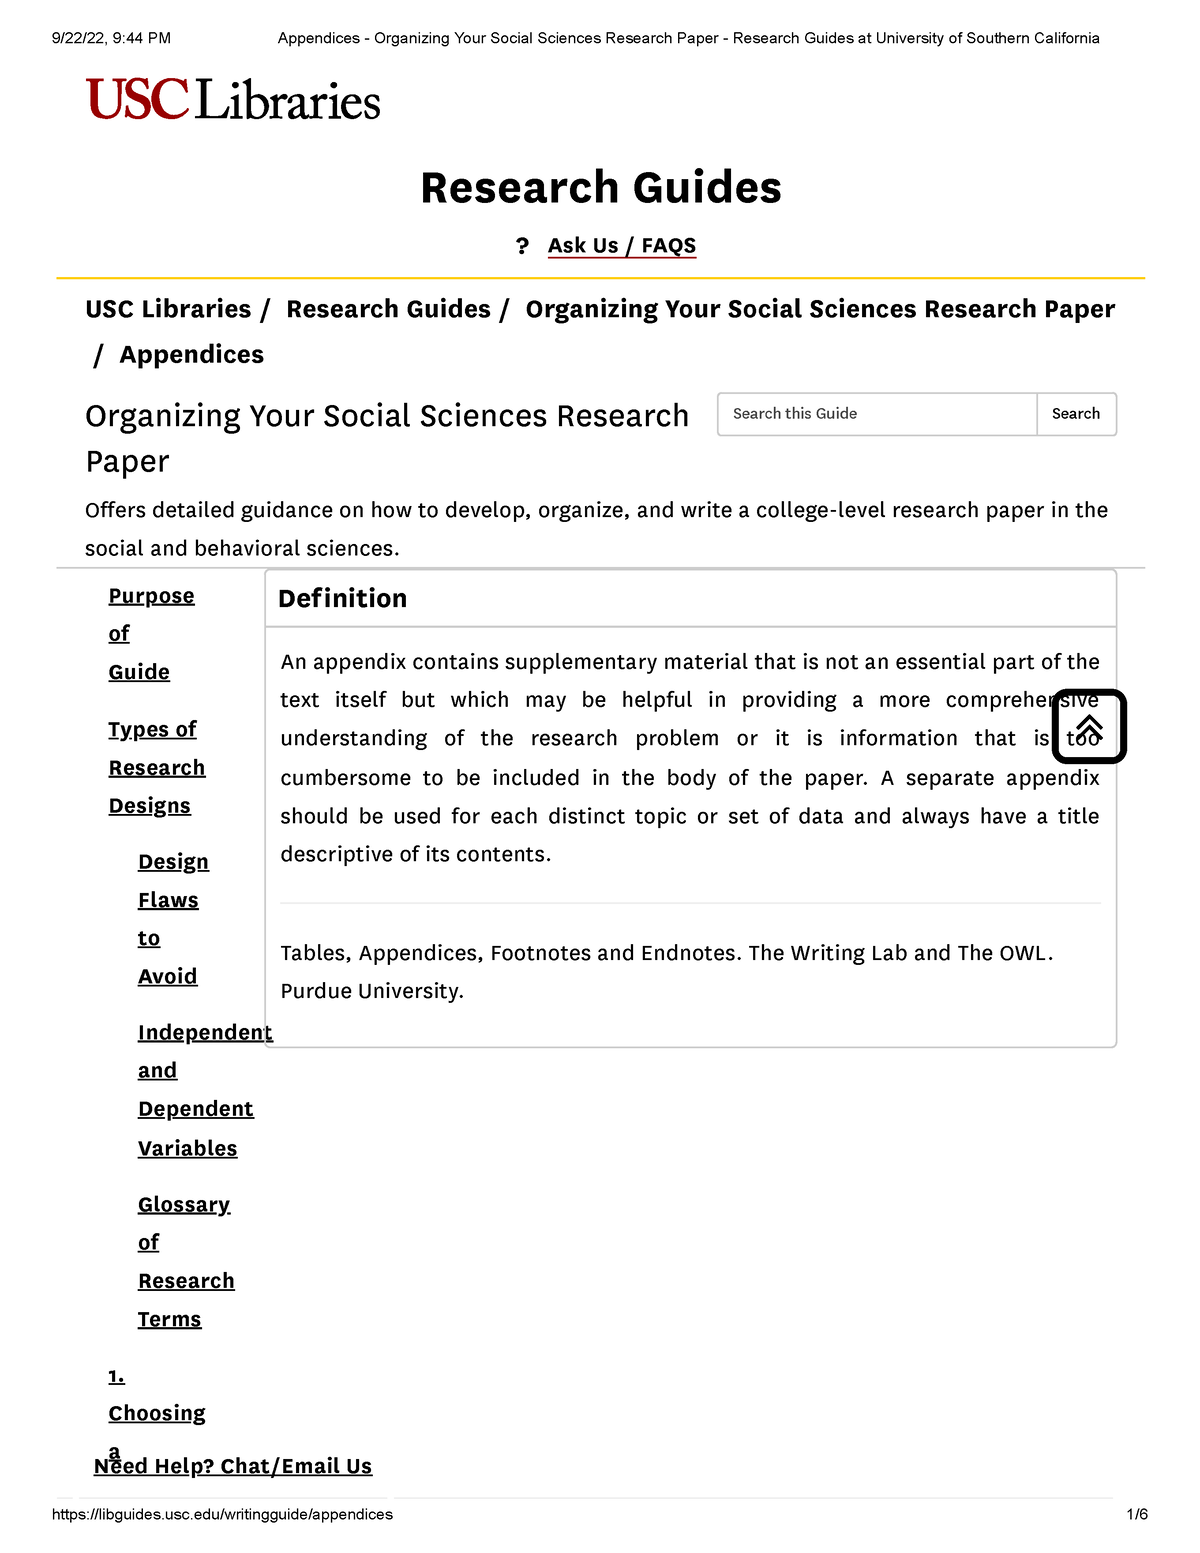 importance of appendices in research paper